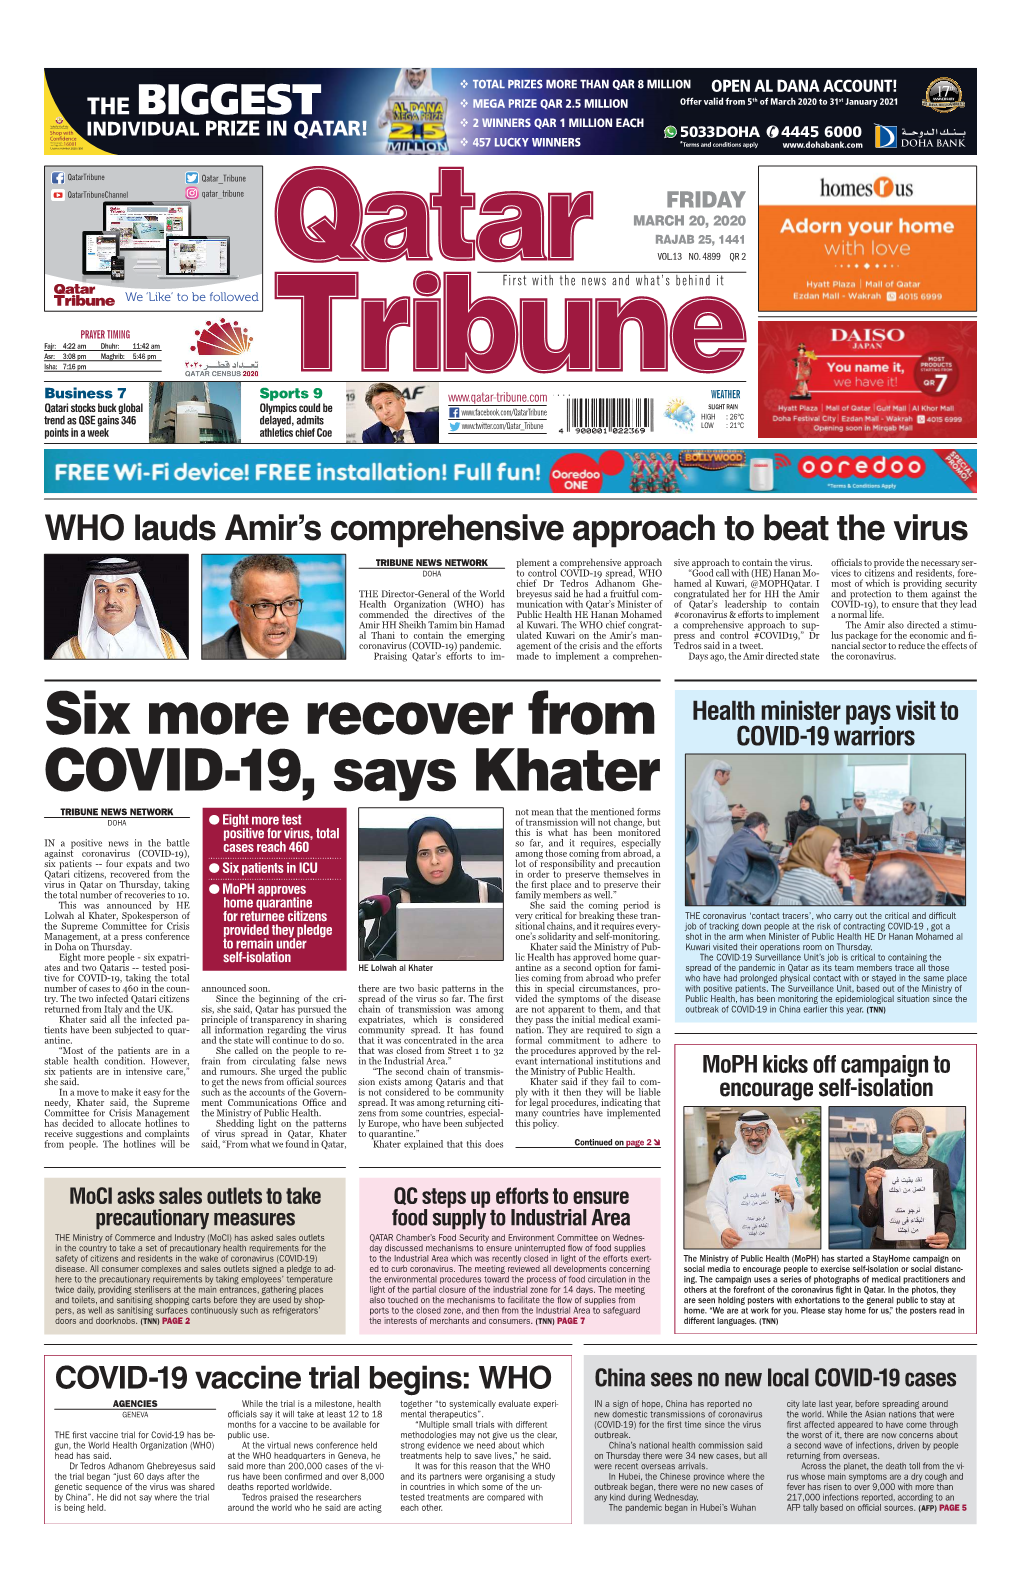 Six More Recover from COVID-19, Says Khater